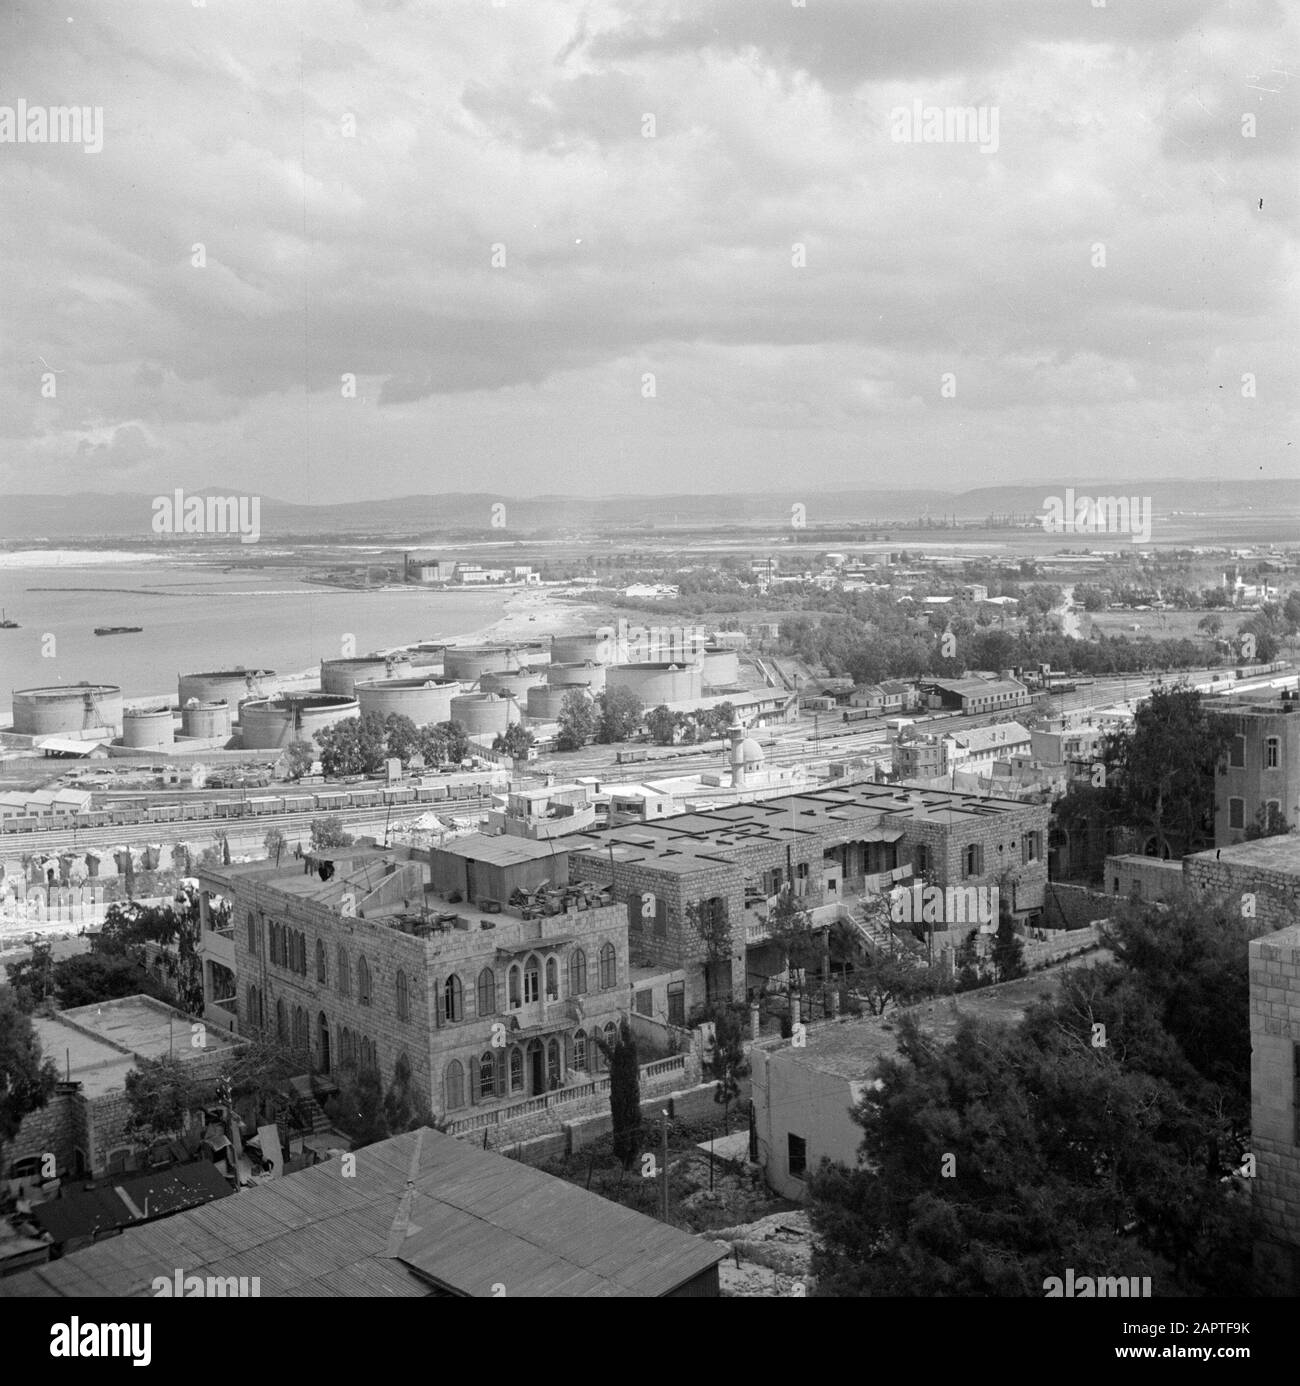 Israel 1948-1949: Haifa  Haifa. City and port with a railway yard and oil installations and with in the foreground dwellings one with roof terrace Date: 1948 Location: Haifa, Israel Keywords: roofs, harbours, storage tanks, panoramas, railways, terraces, homes Stock Photo